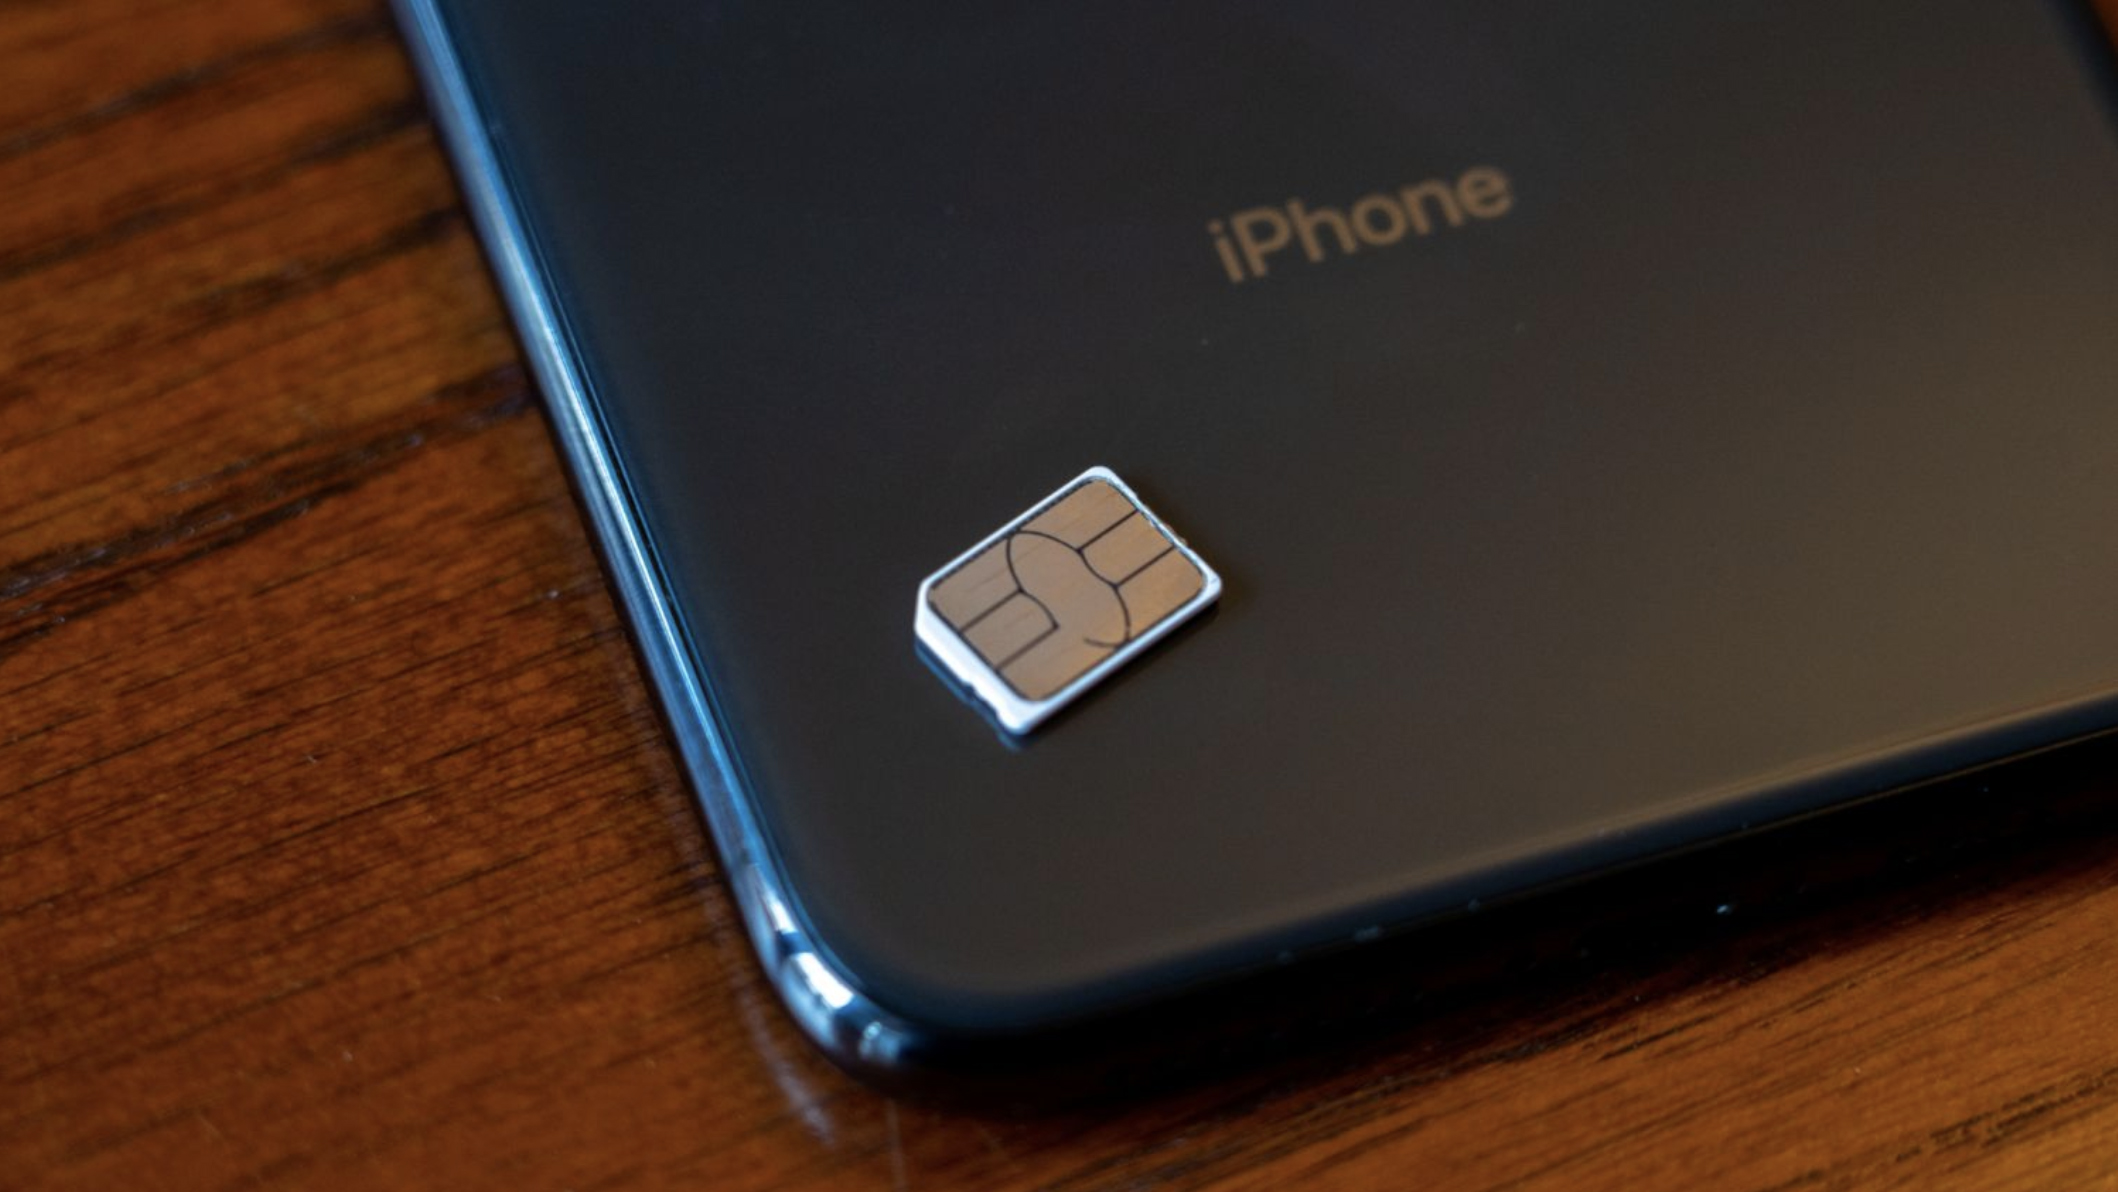 Remove or switch the SIM card in your iPhone - Apple Support